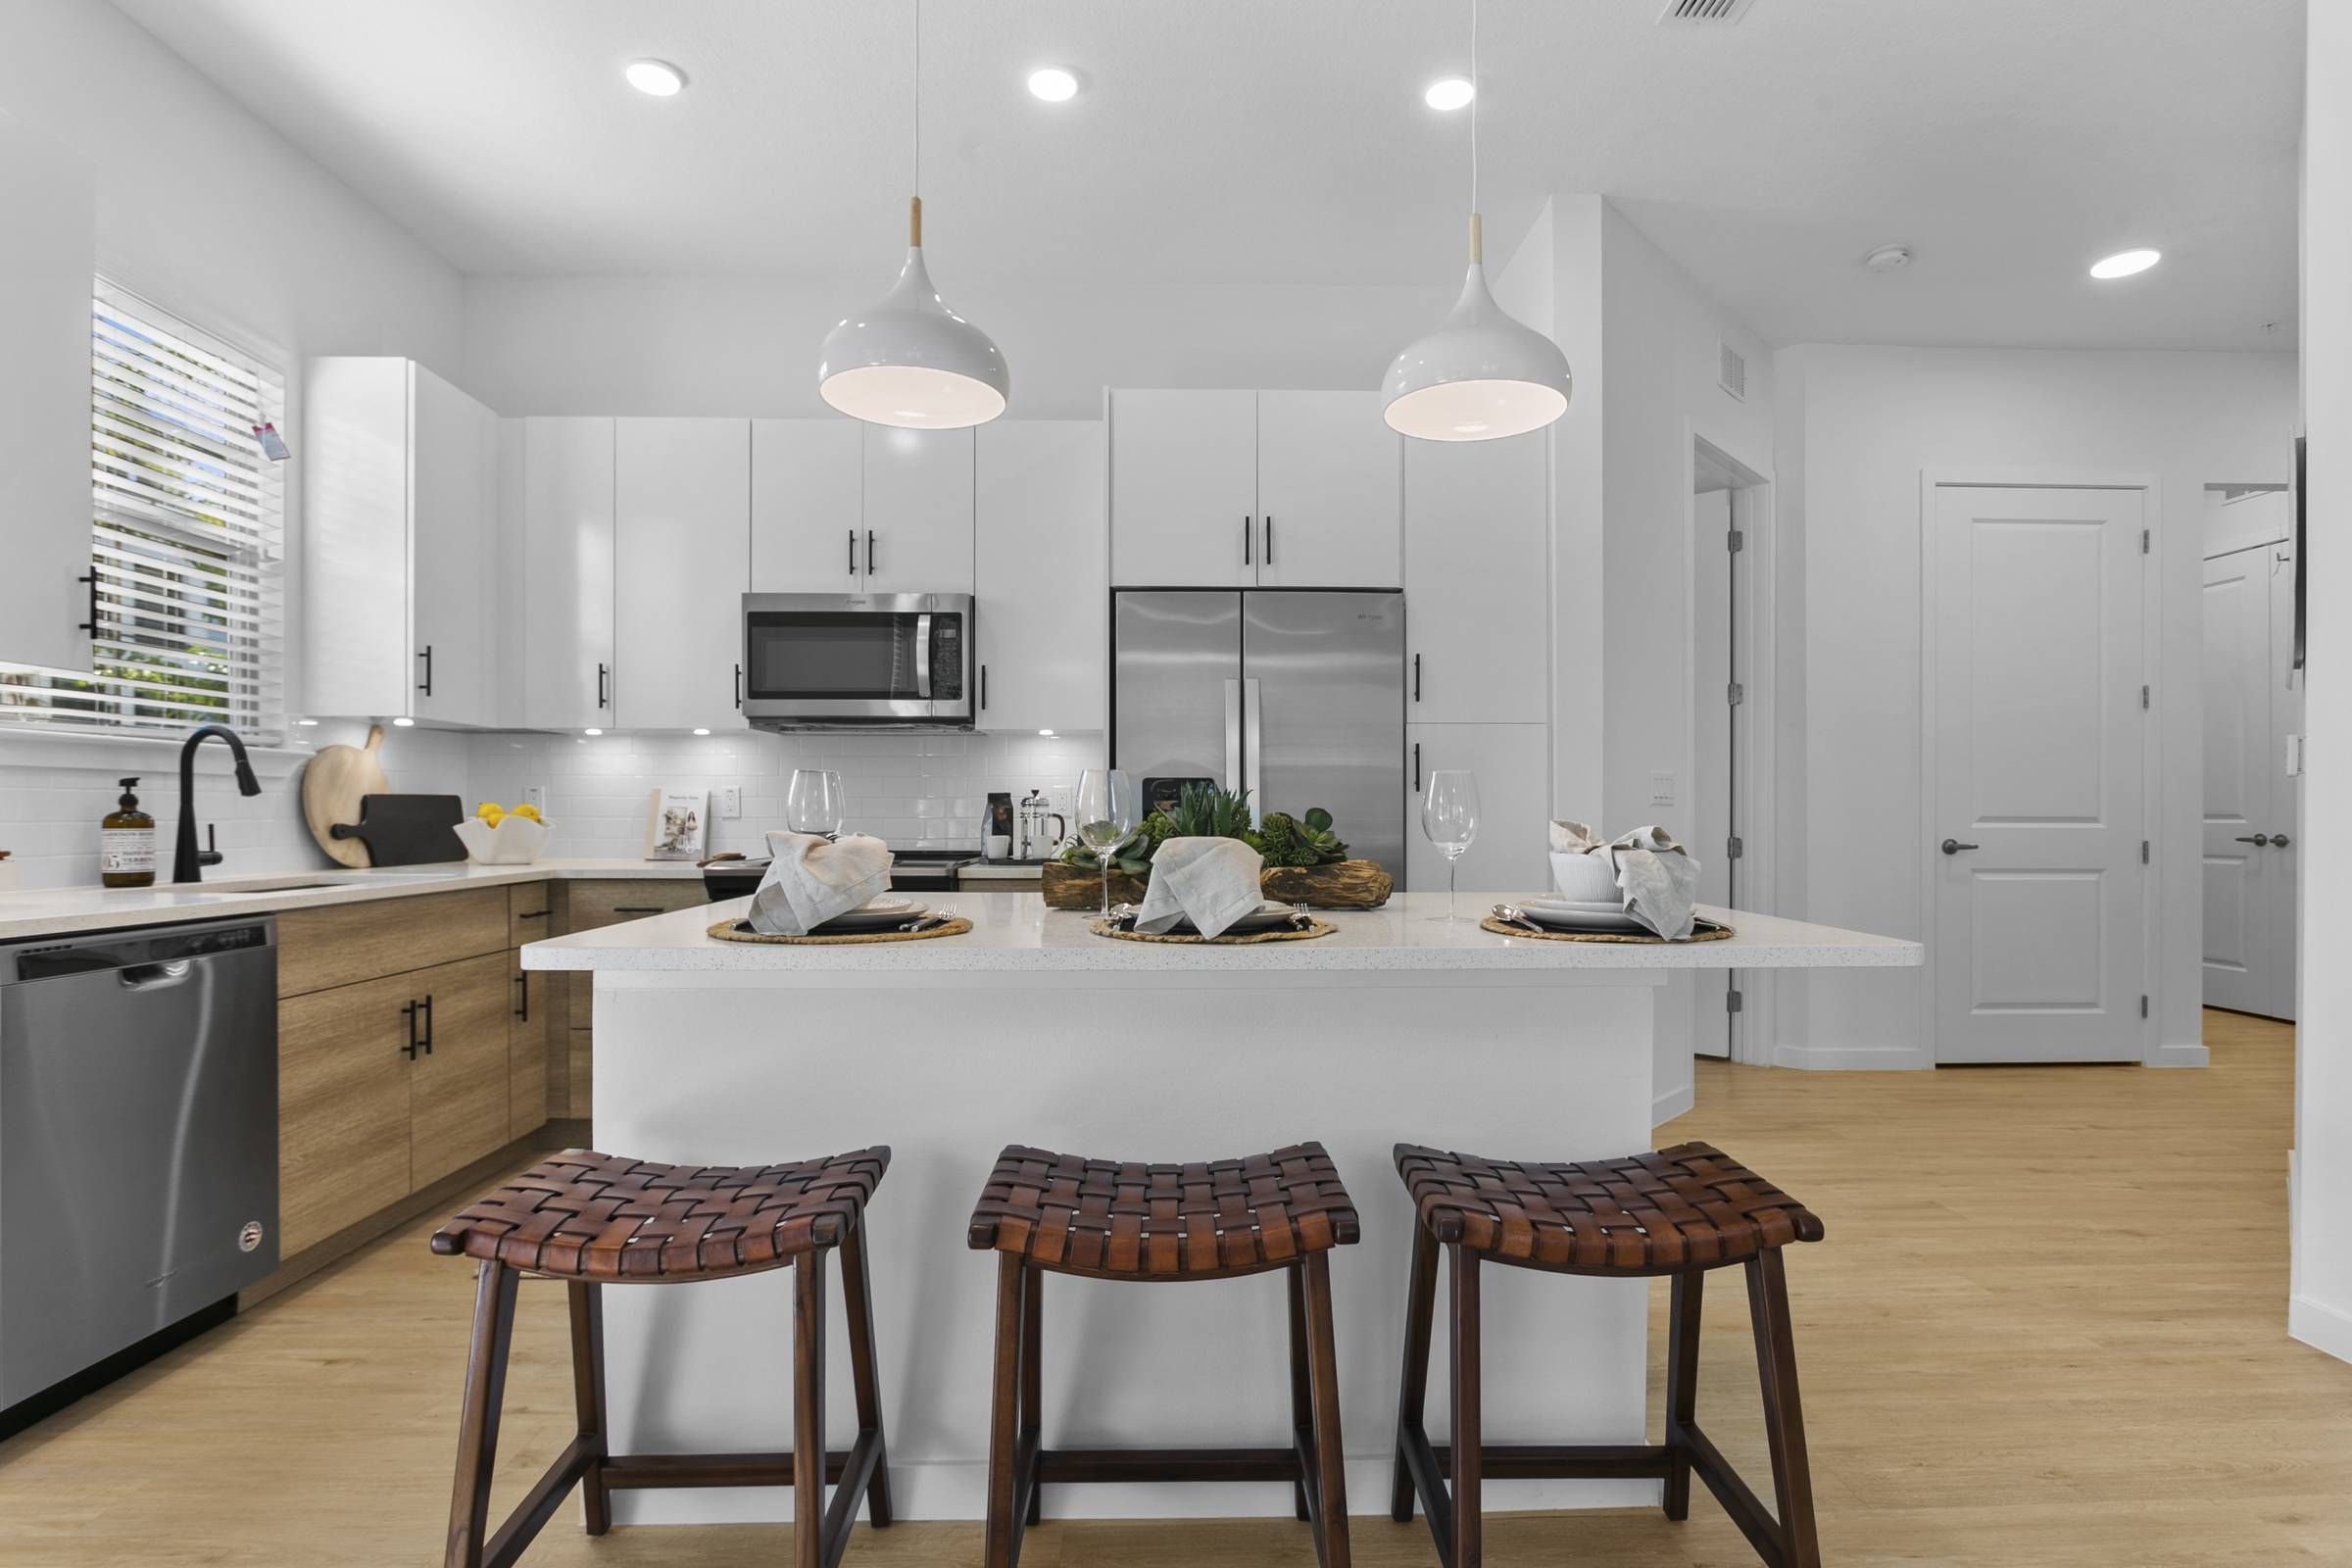 Alta Clearwater's open-concept kitchen features modern lighting and a welcoming breakfast bar.